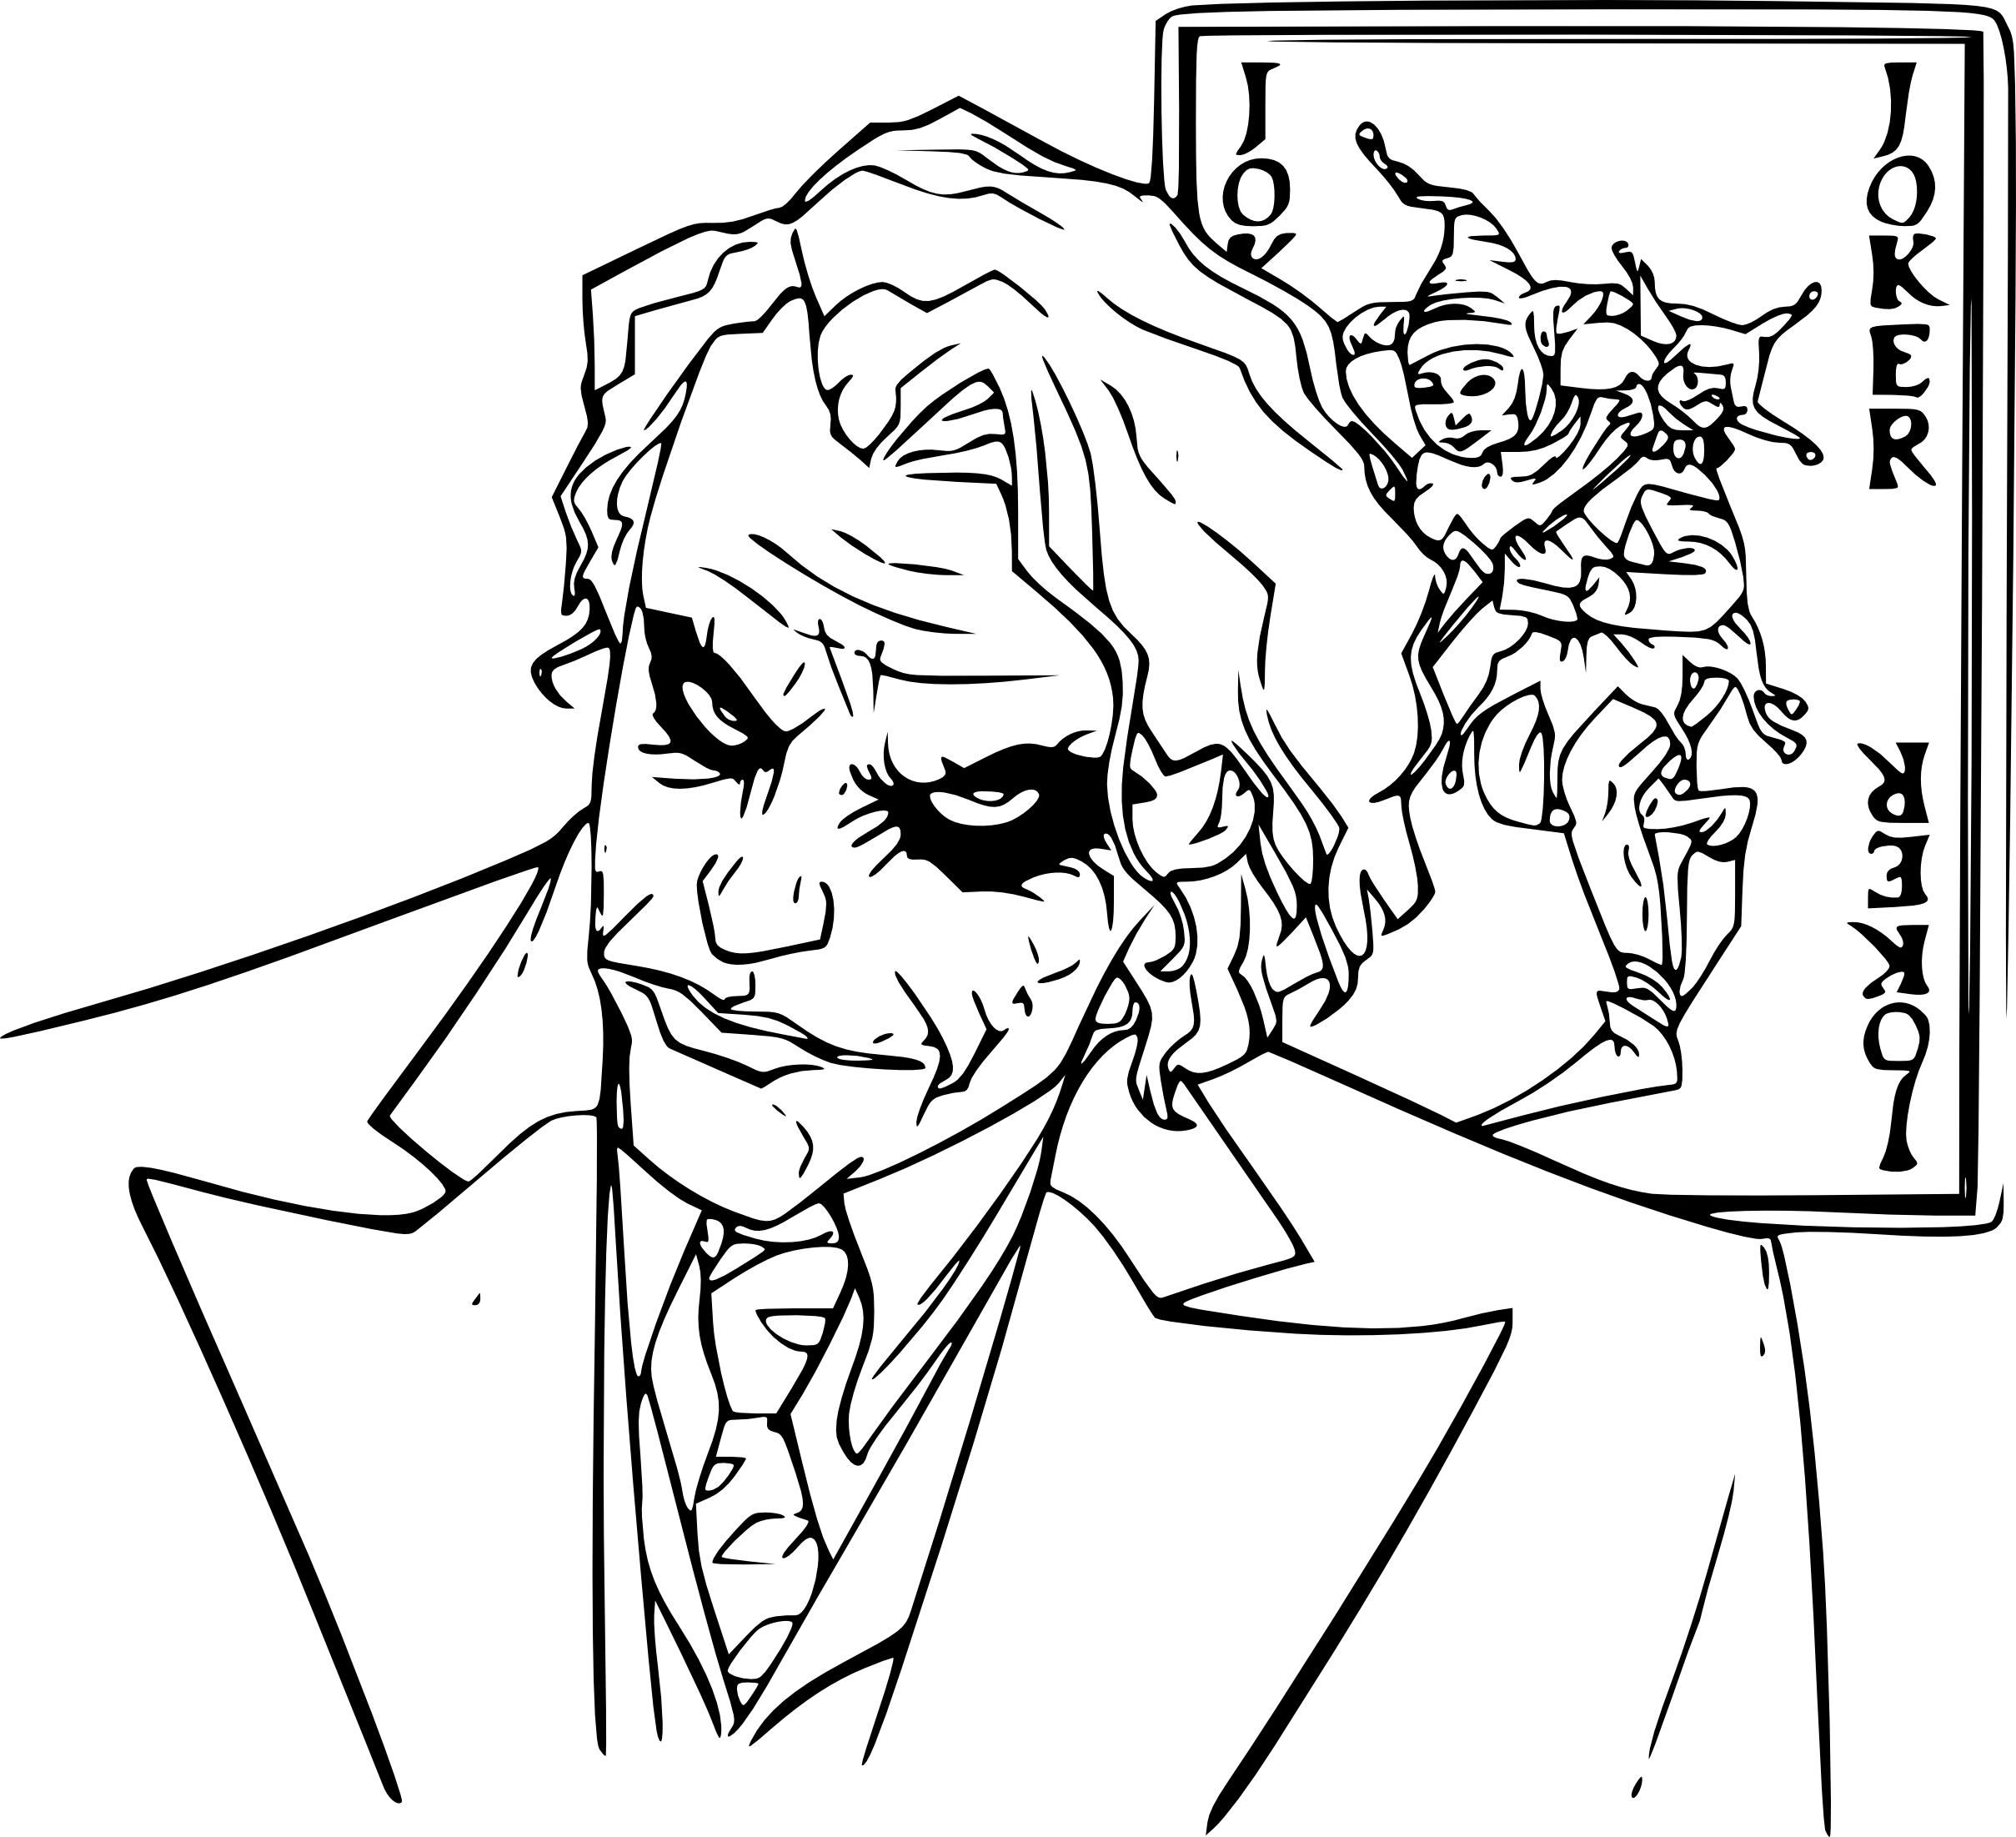 Batman And Joker Coloring Pages 24 The Joker Coloring Pages Compilation Free Coloring Pages